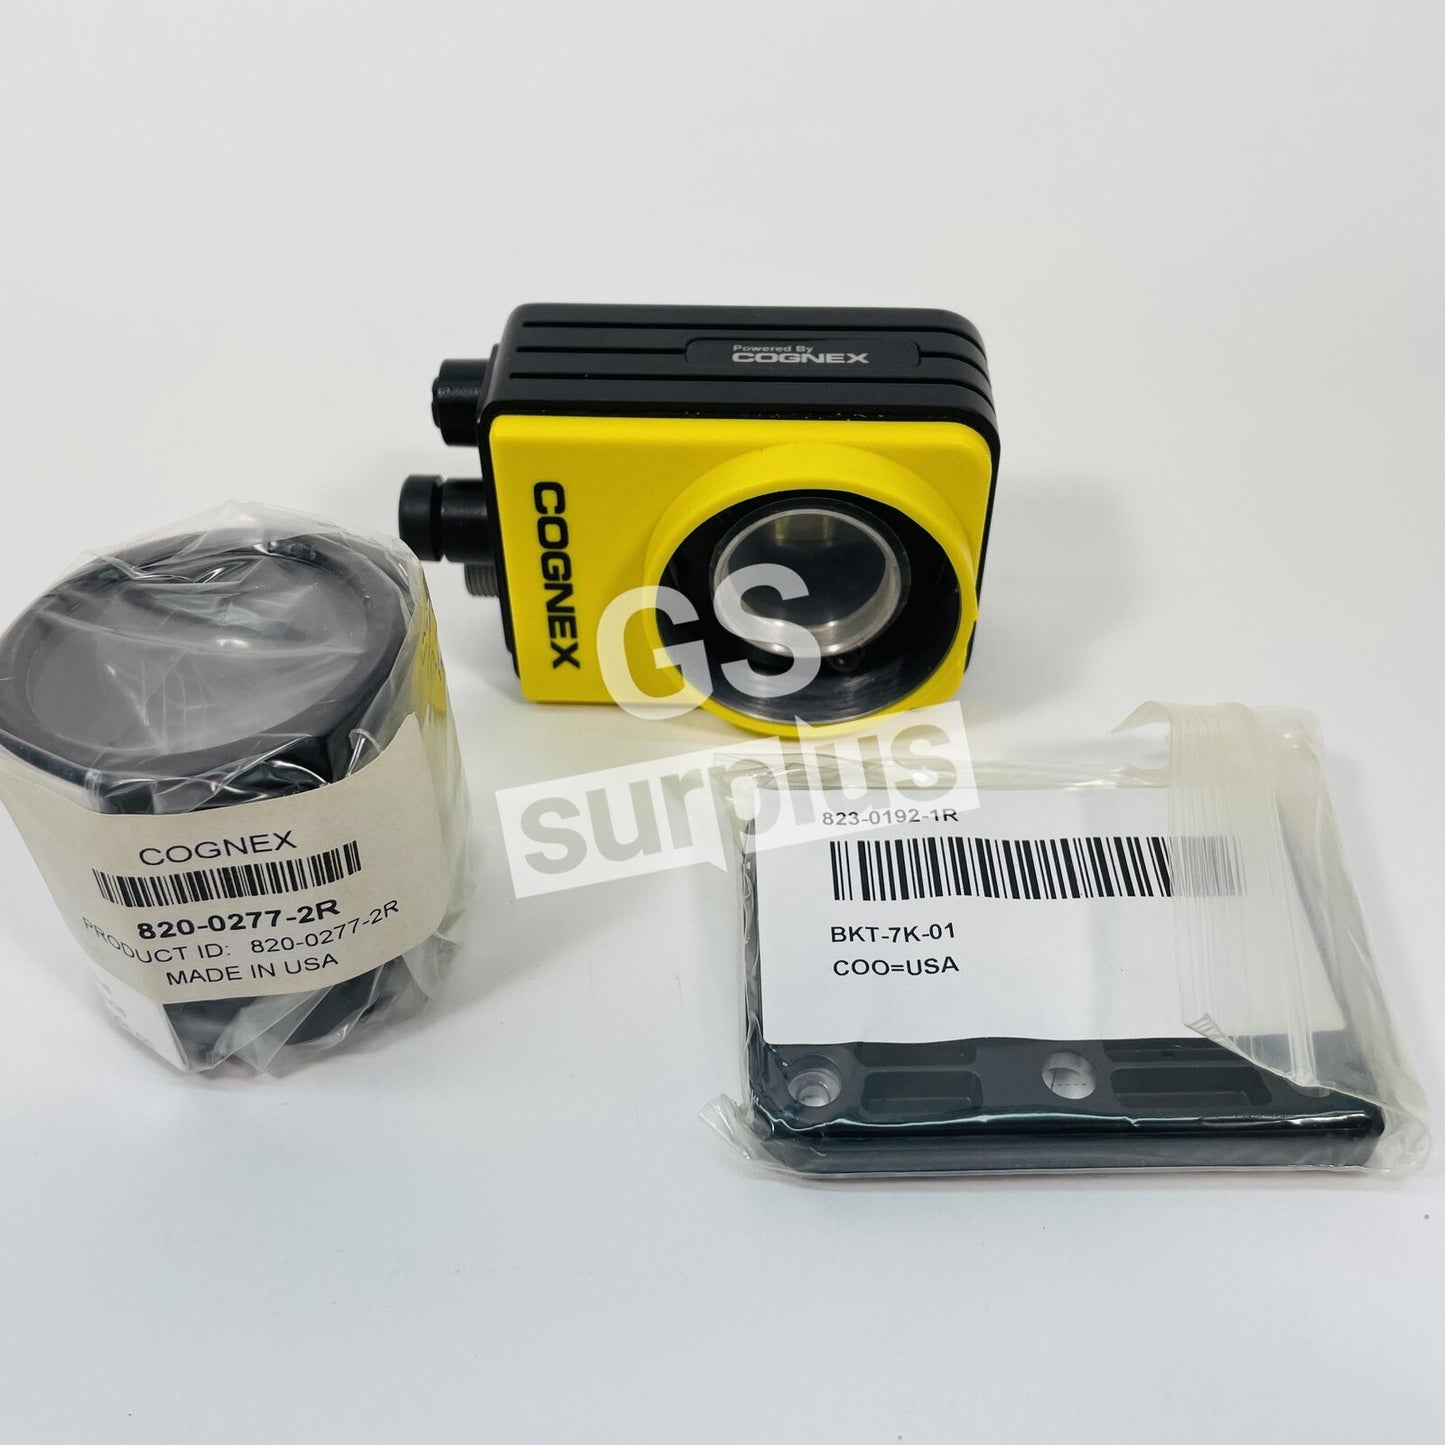 New  COGNEX IS7402-01 / 825-0523-1R InSight Vision Camera